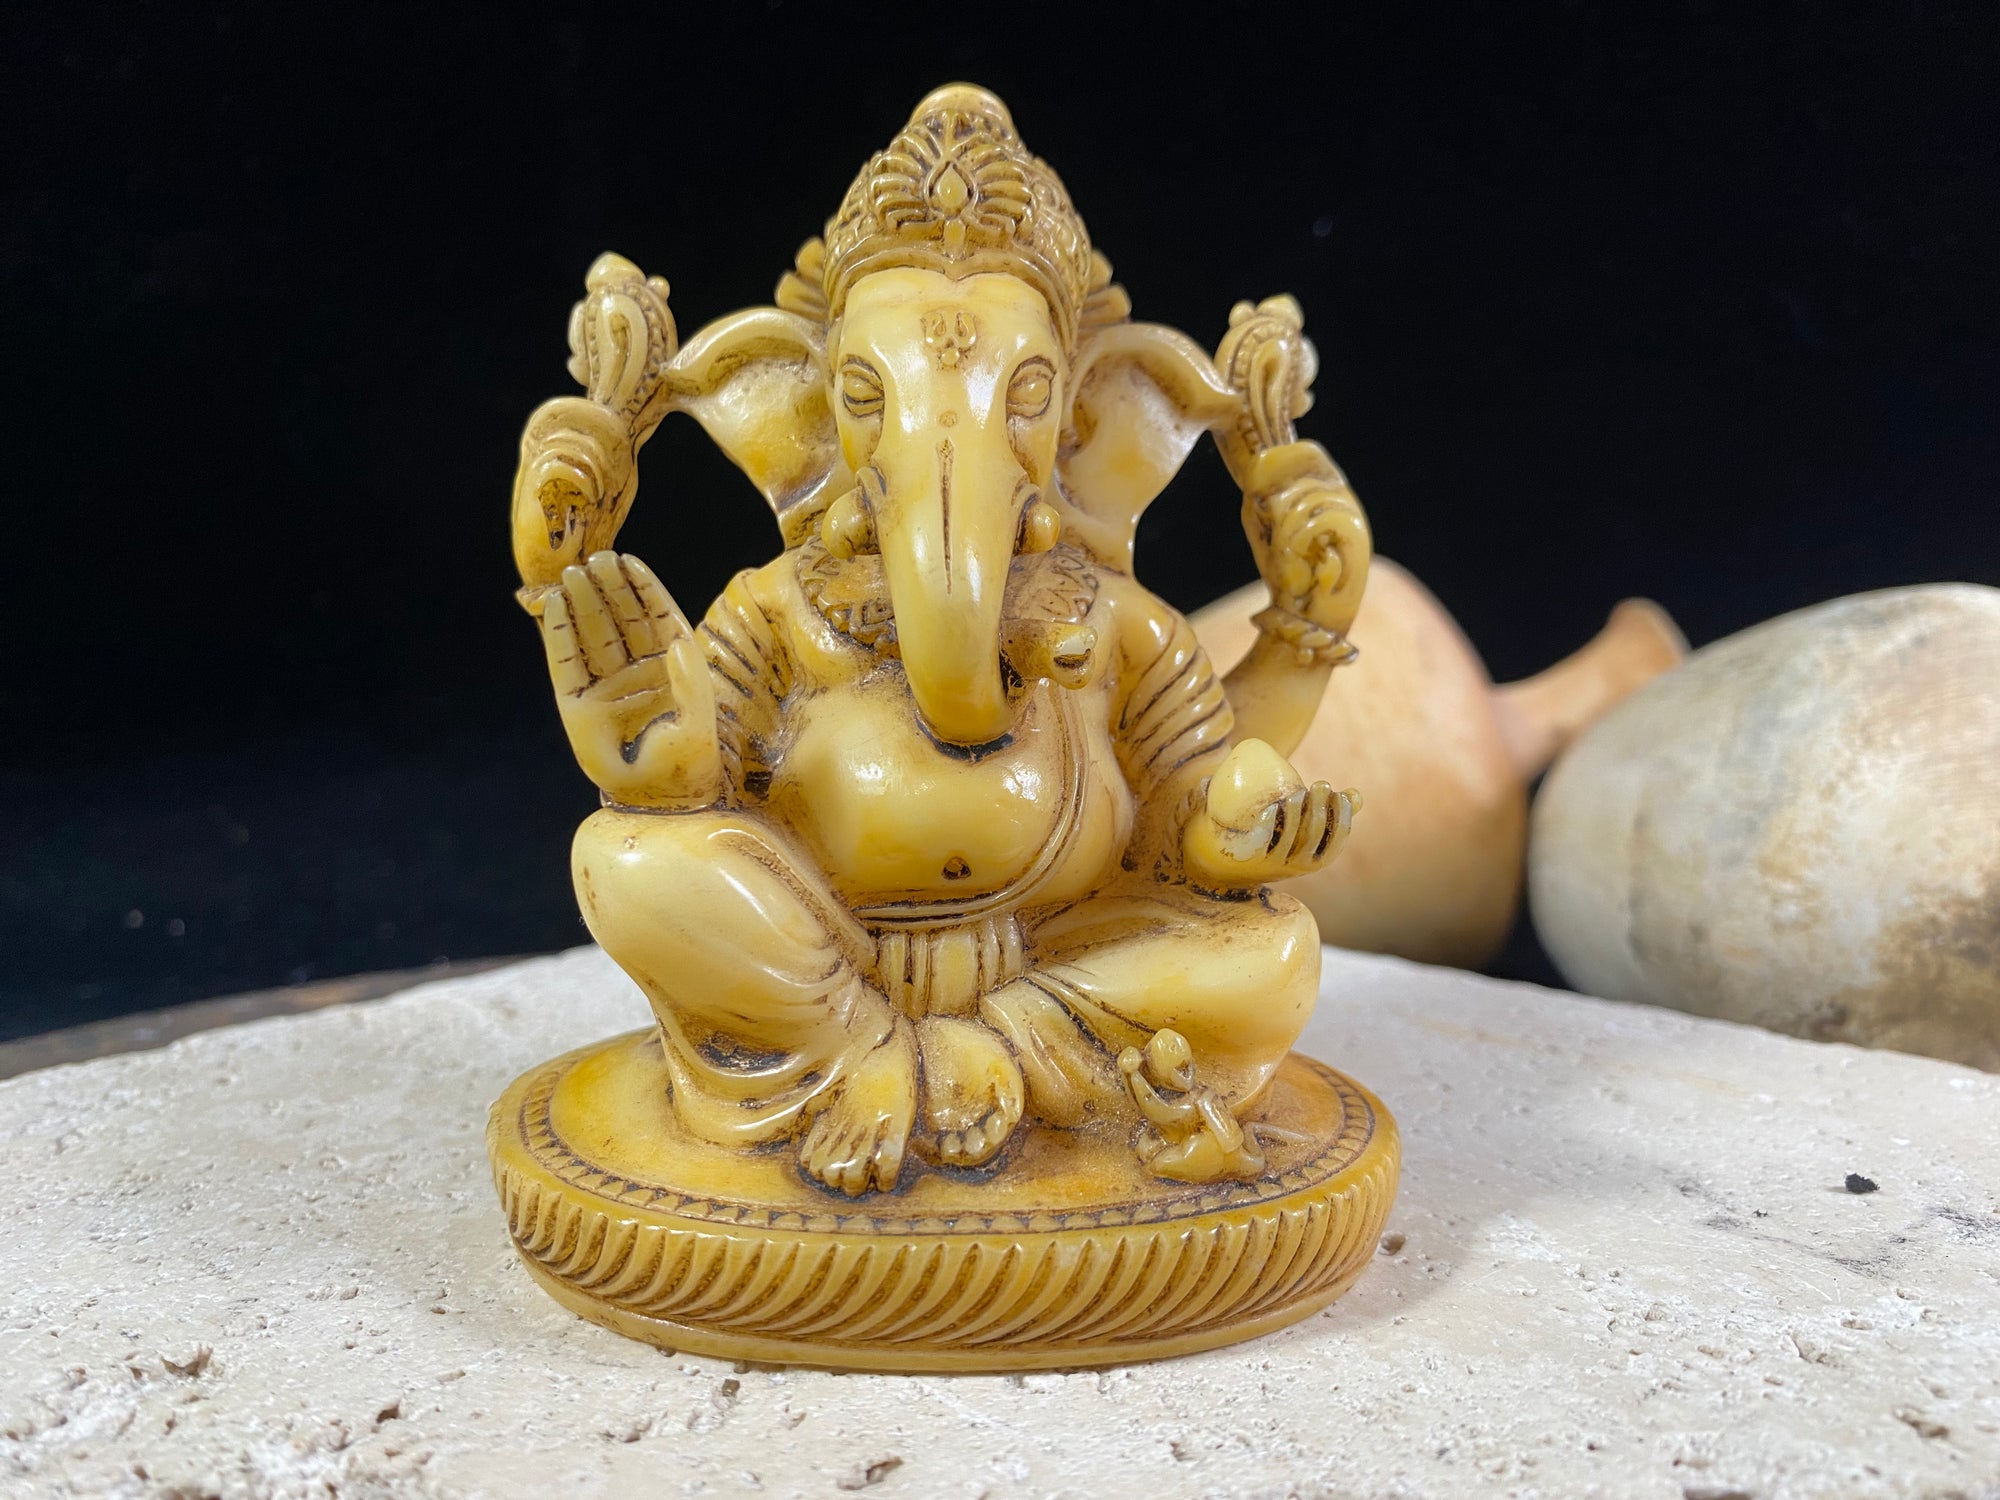 This is an exquisite Ganesh statue cast in cream coloured resin. Our very detailed Ganesh is hand finished to a very high standard. Measurements: height 9 cm, width 7.5 cm, depth 5 cm